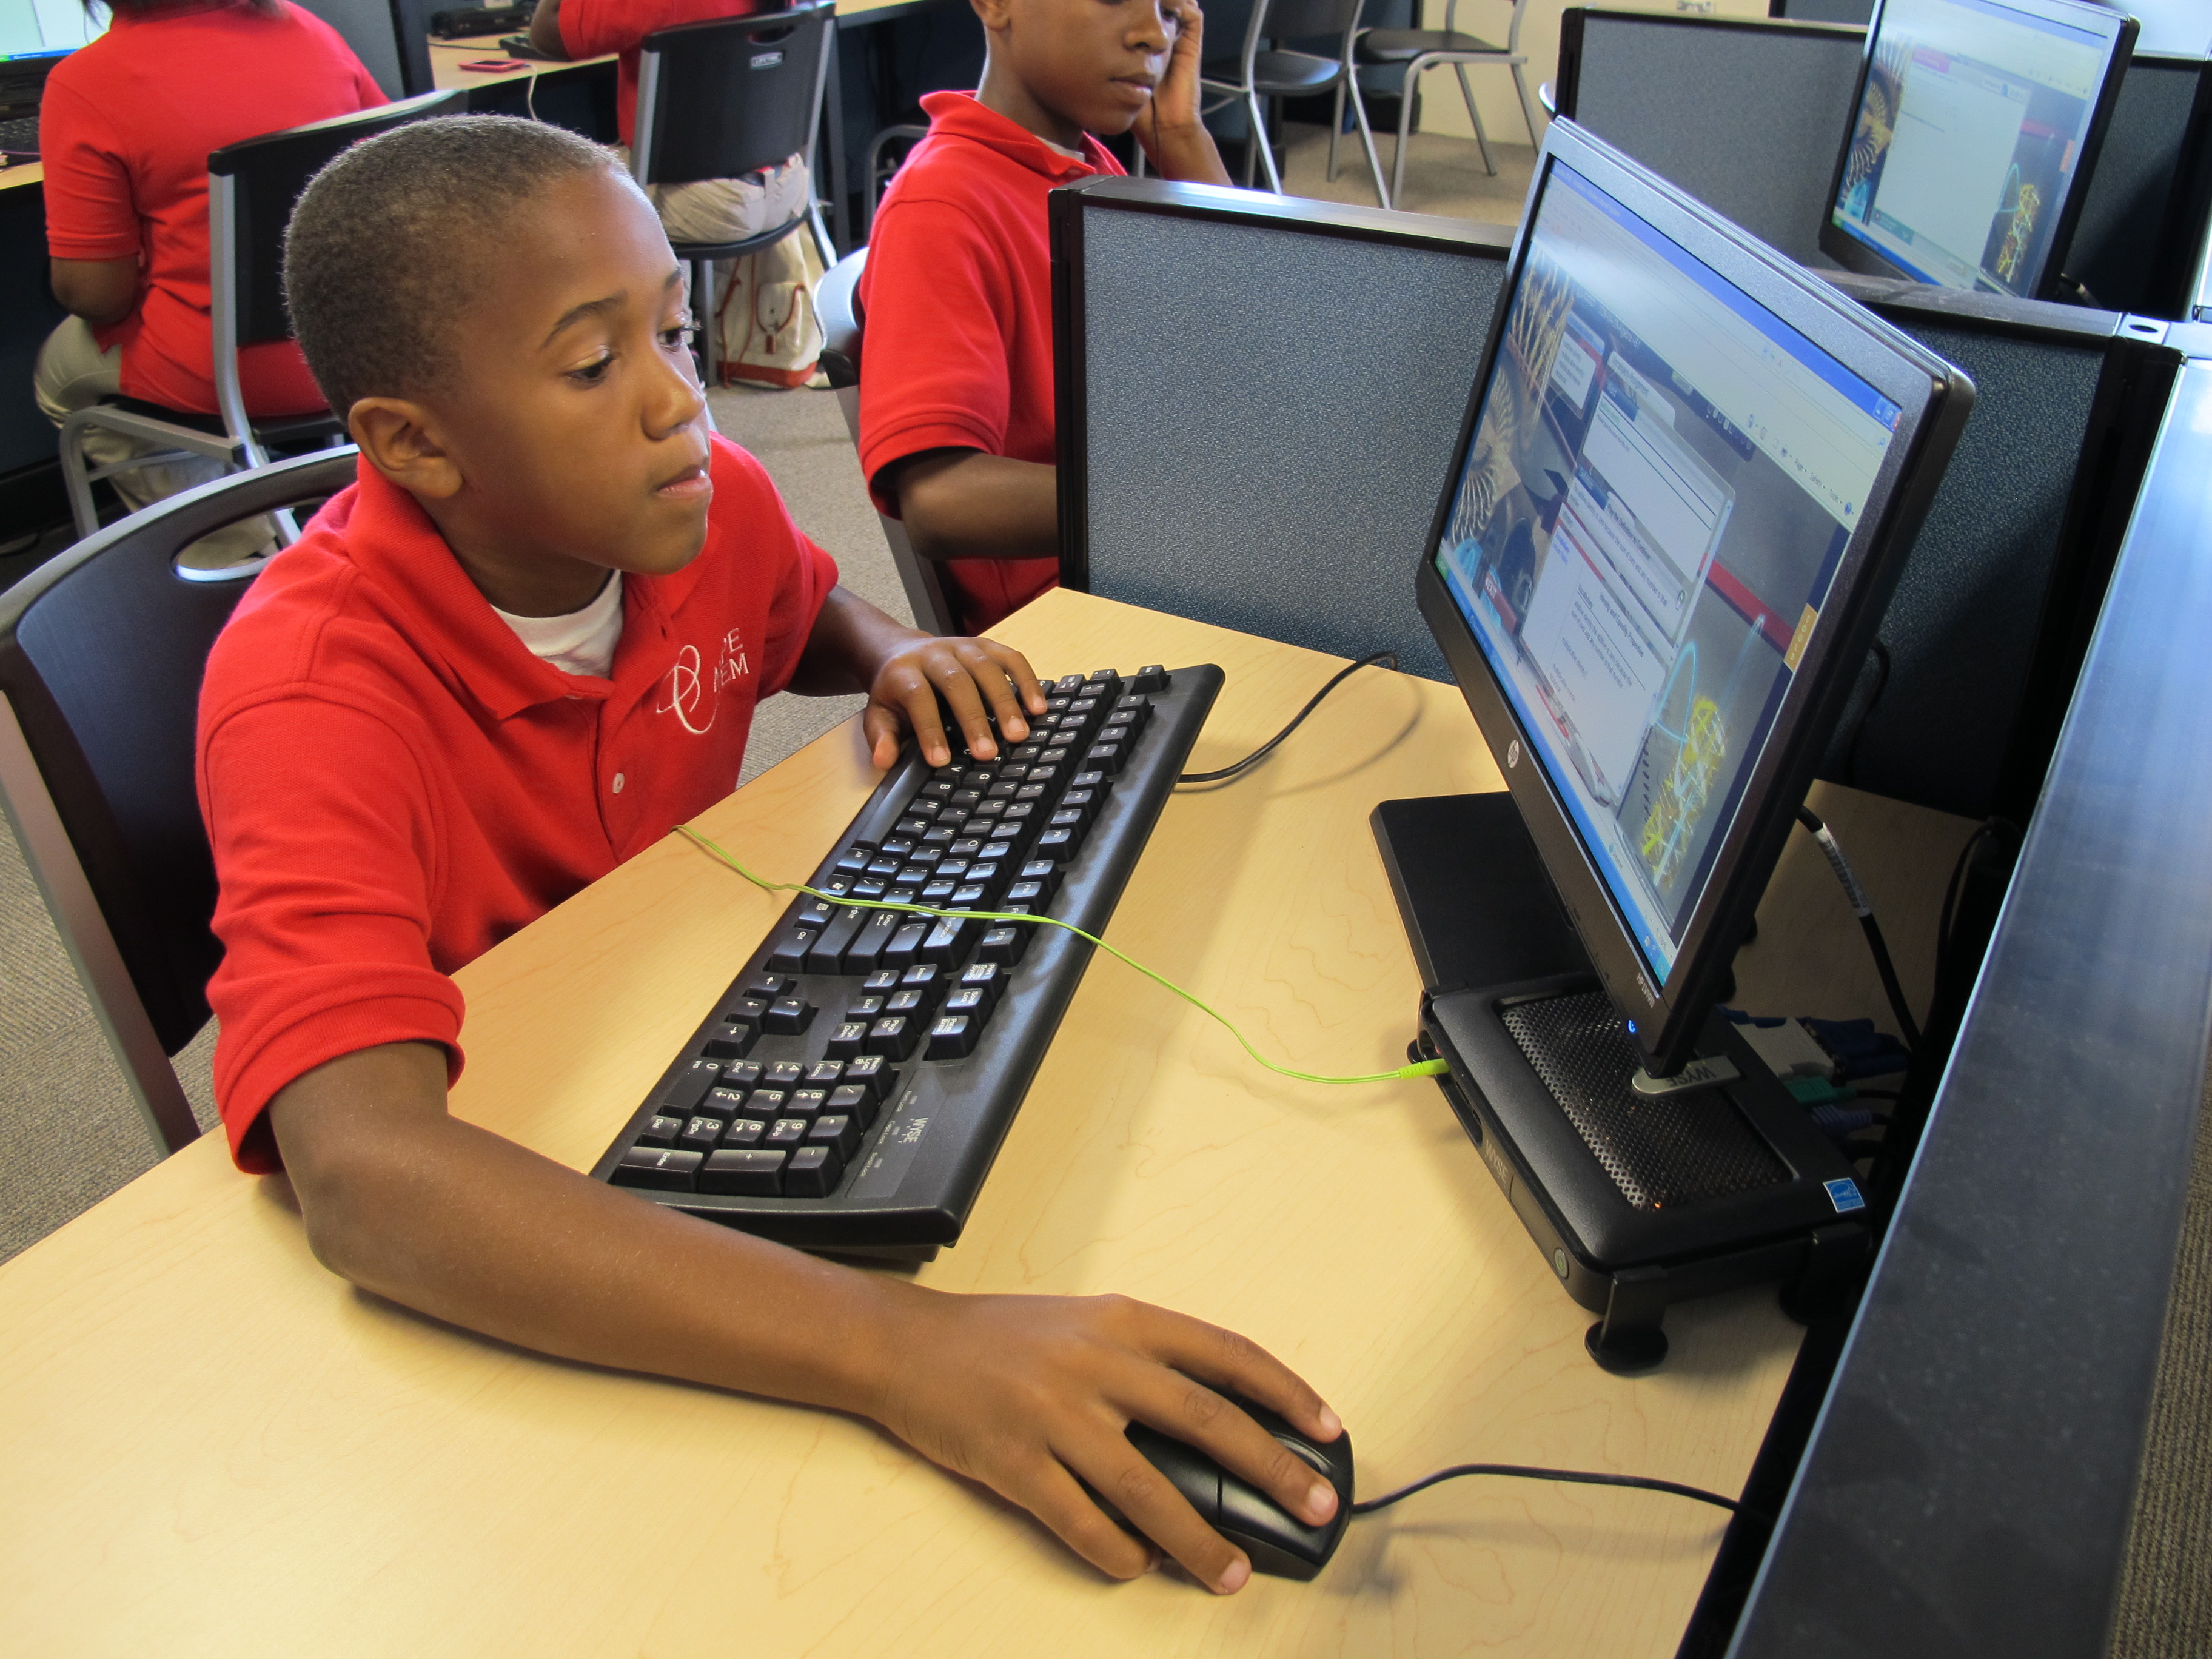 How A Federal Prize May Push More Schools To 'Blend' Computer & Classroom | StateImpact Indiana